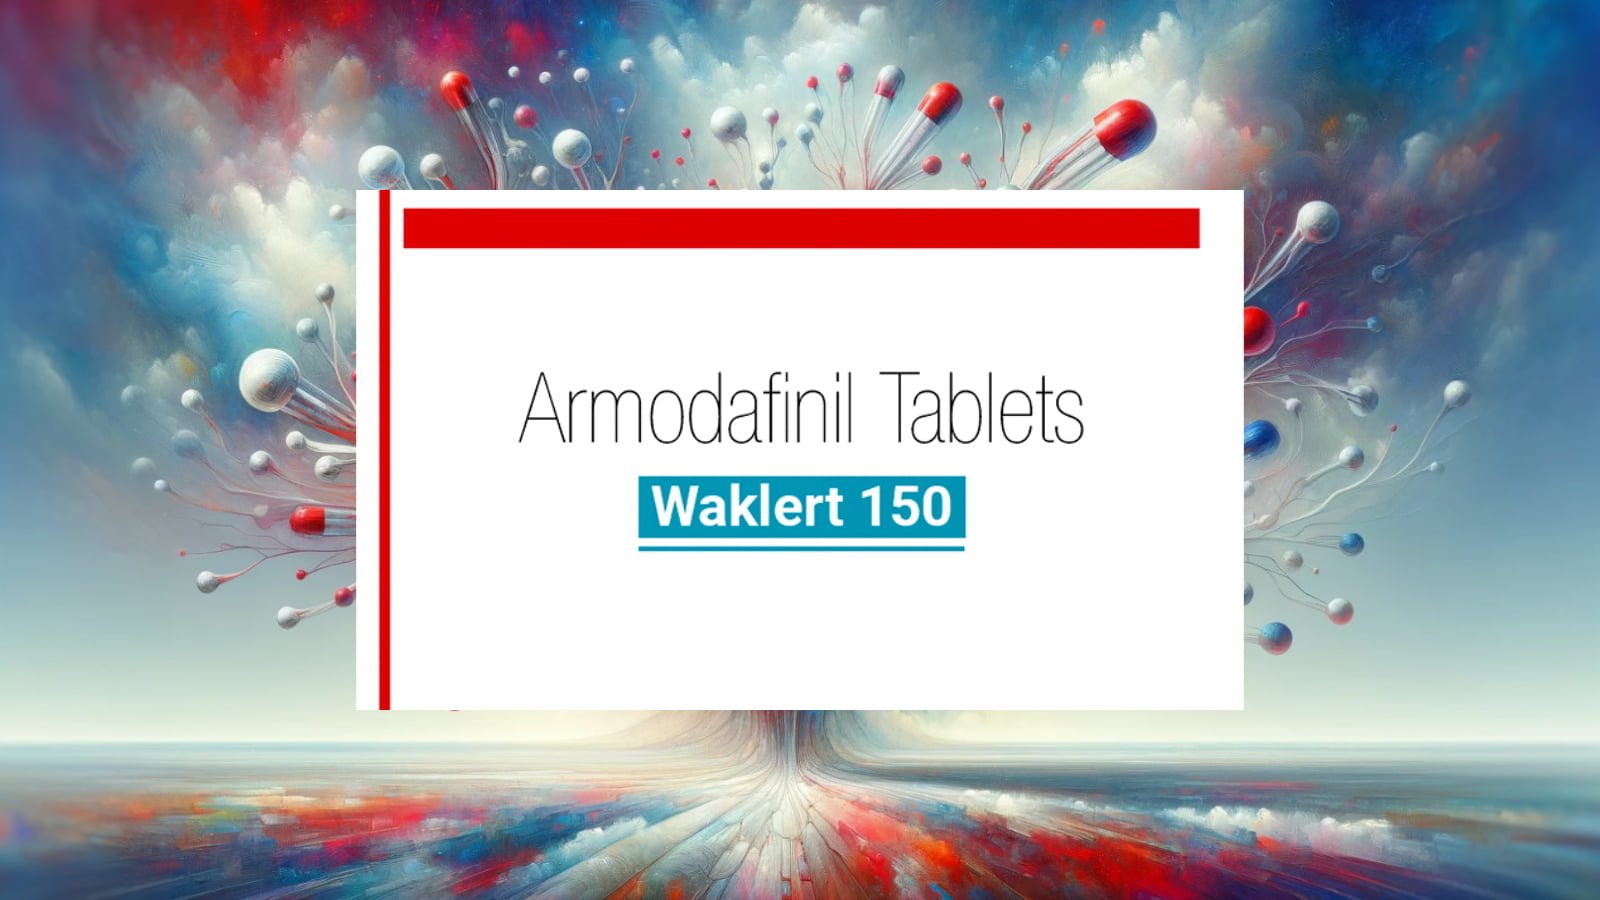 Comprehensive review of Waklert covering its nootropic benefits, uses, dosage, and side effects.